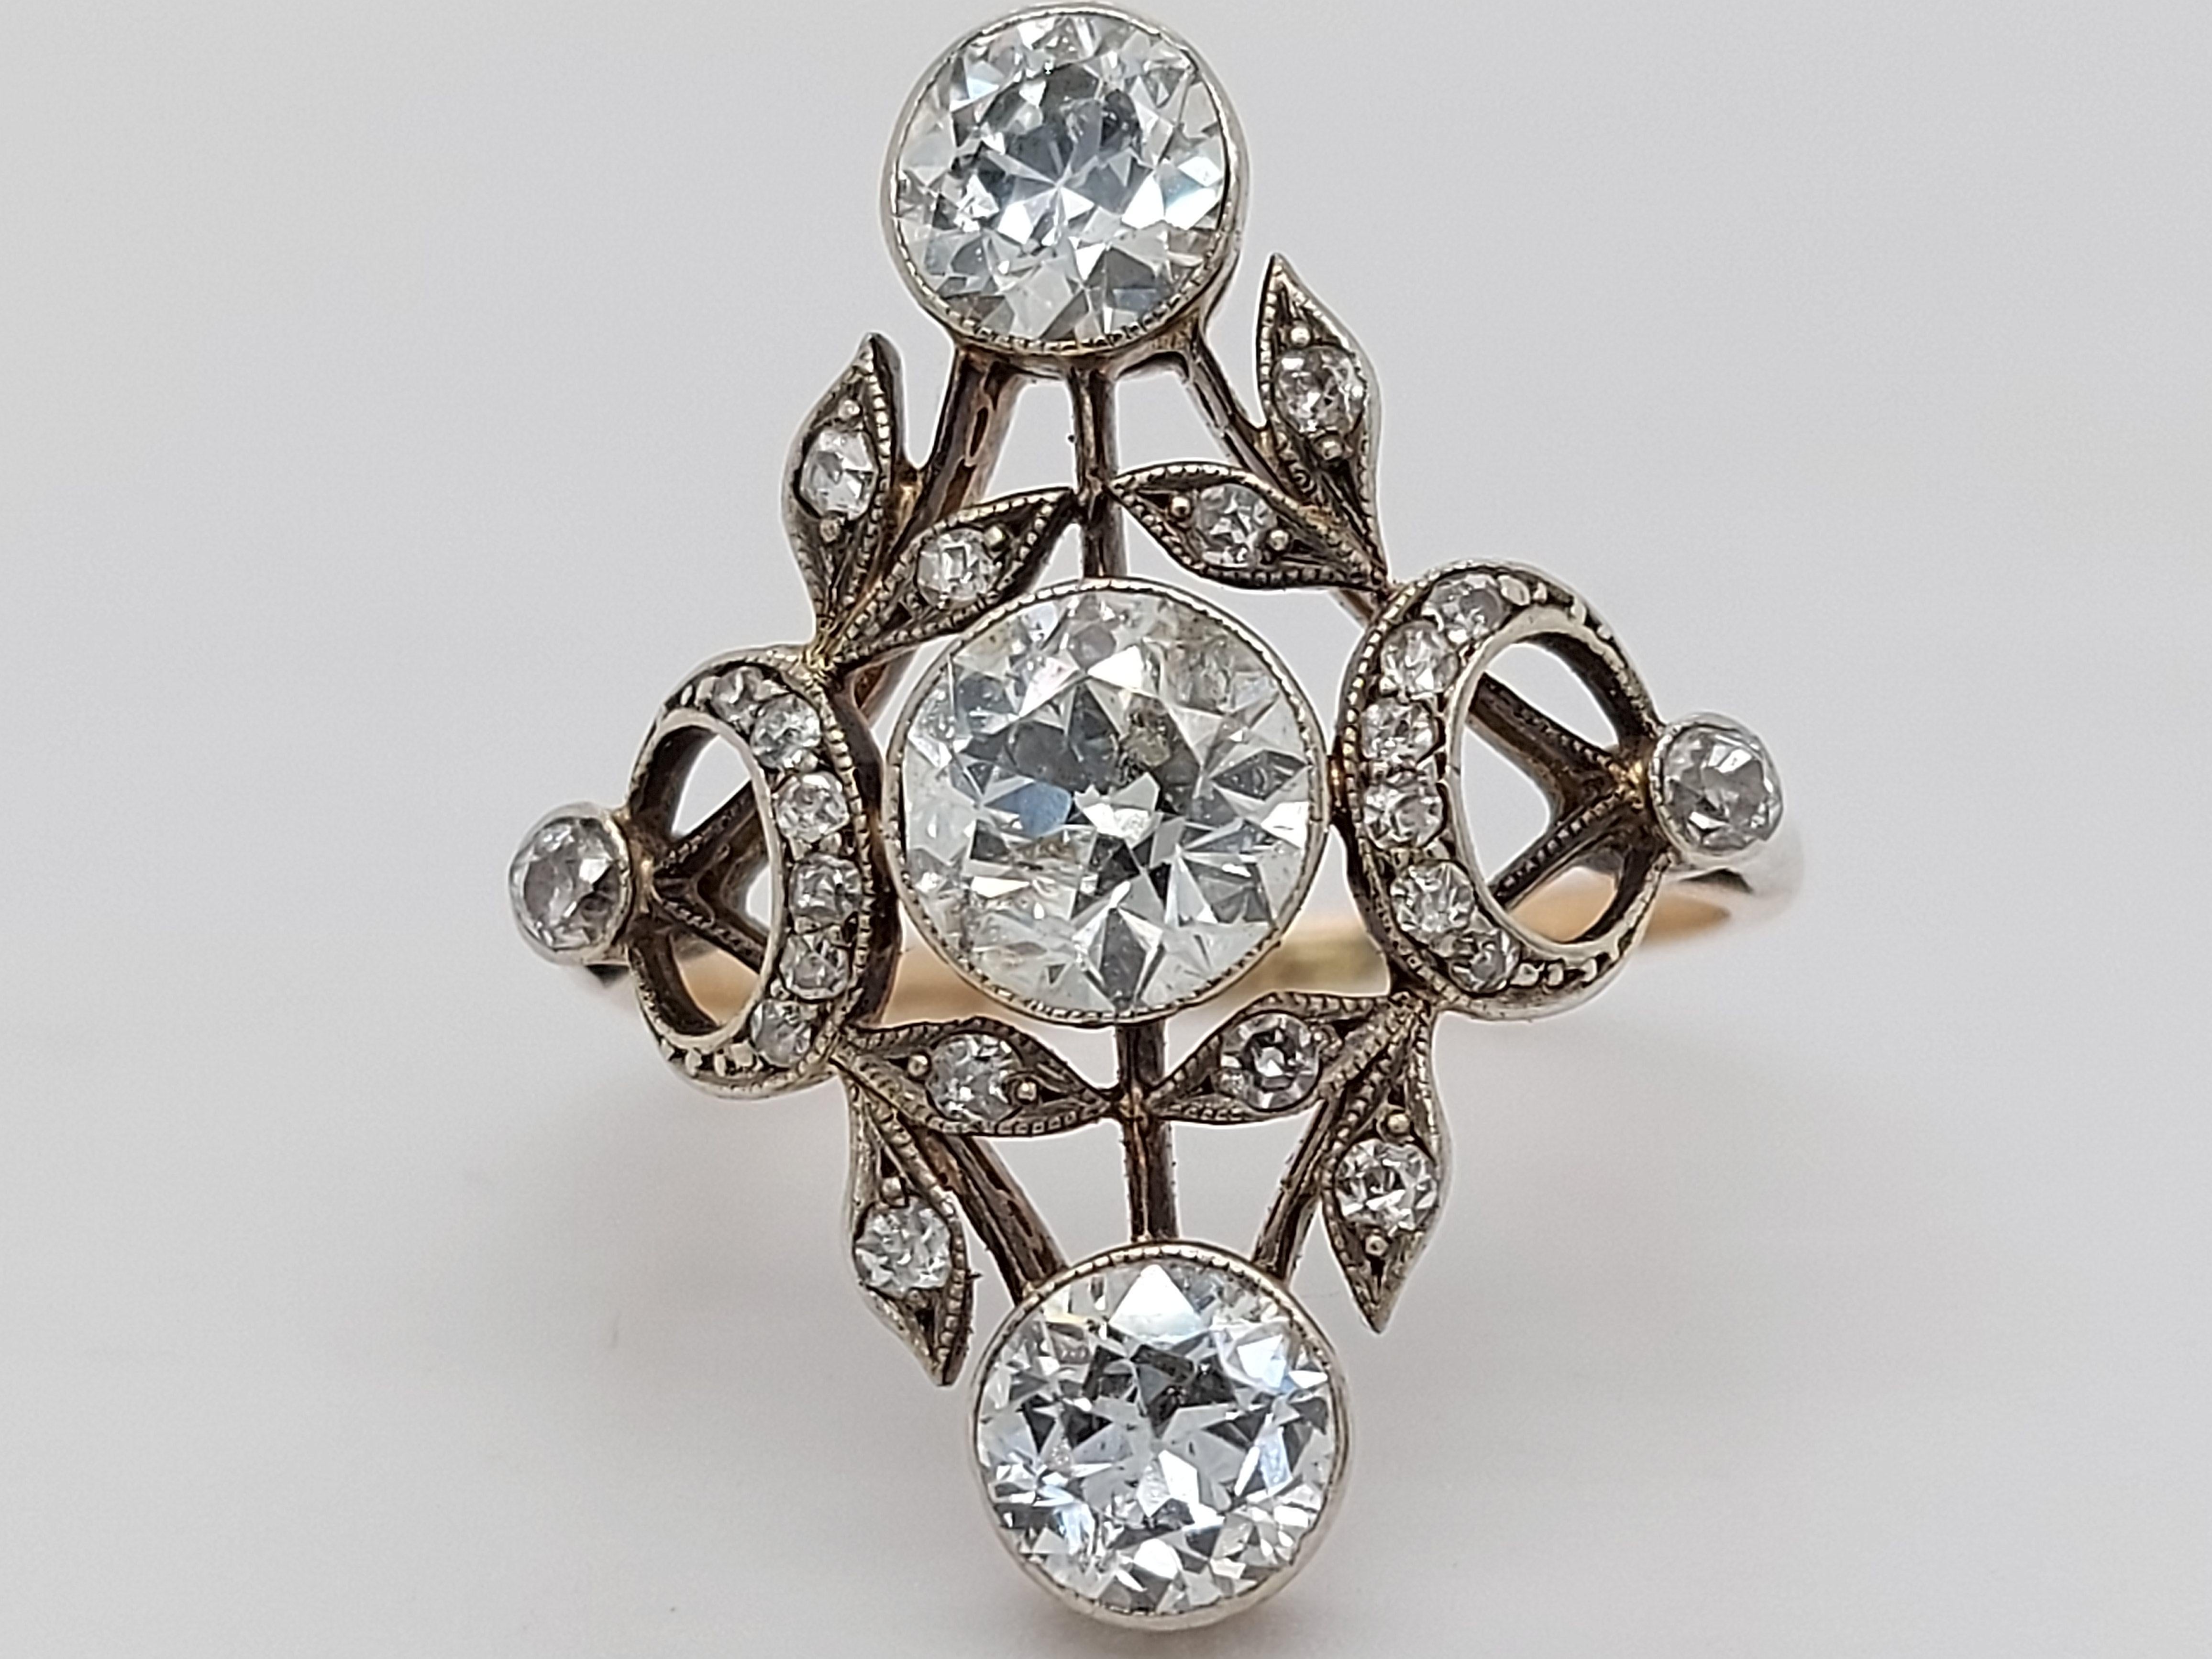 Stunning 18 Karat Gold and Silver Ring with Diamonds from the 1900s, Trilogy For Sale 2